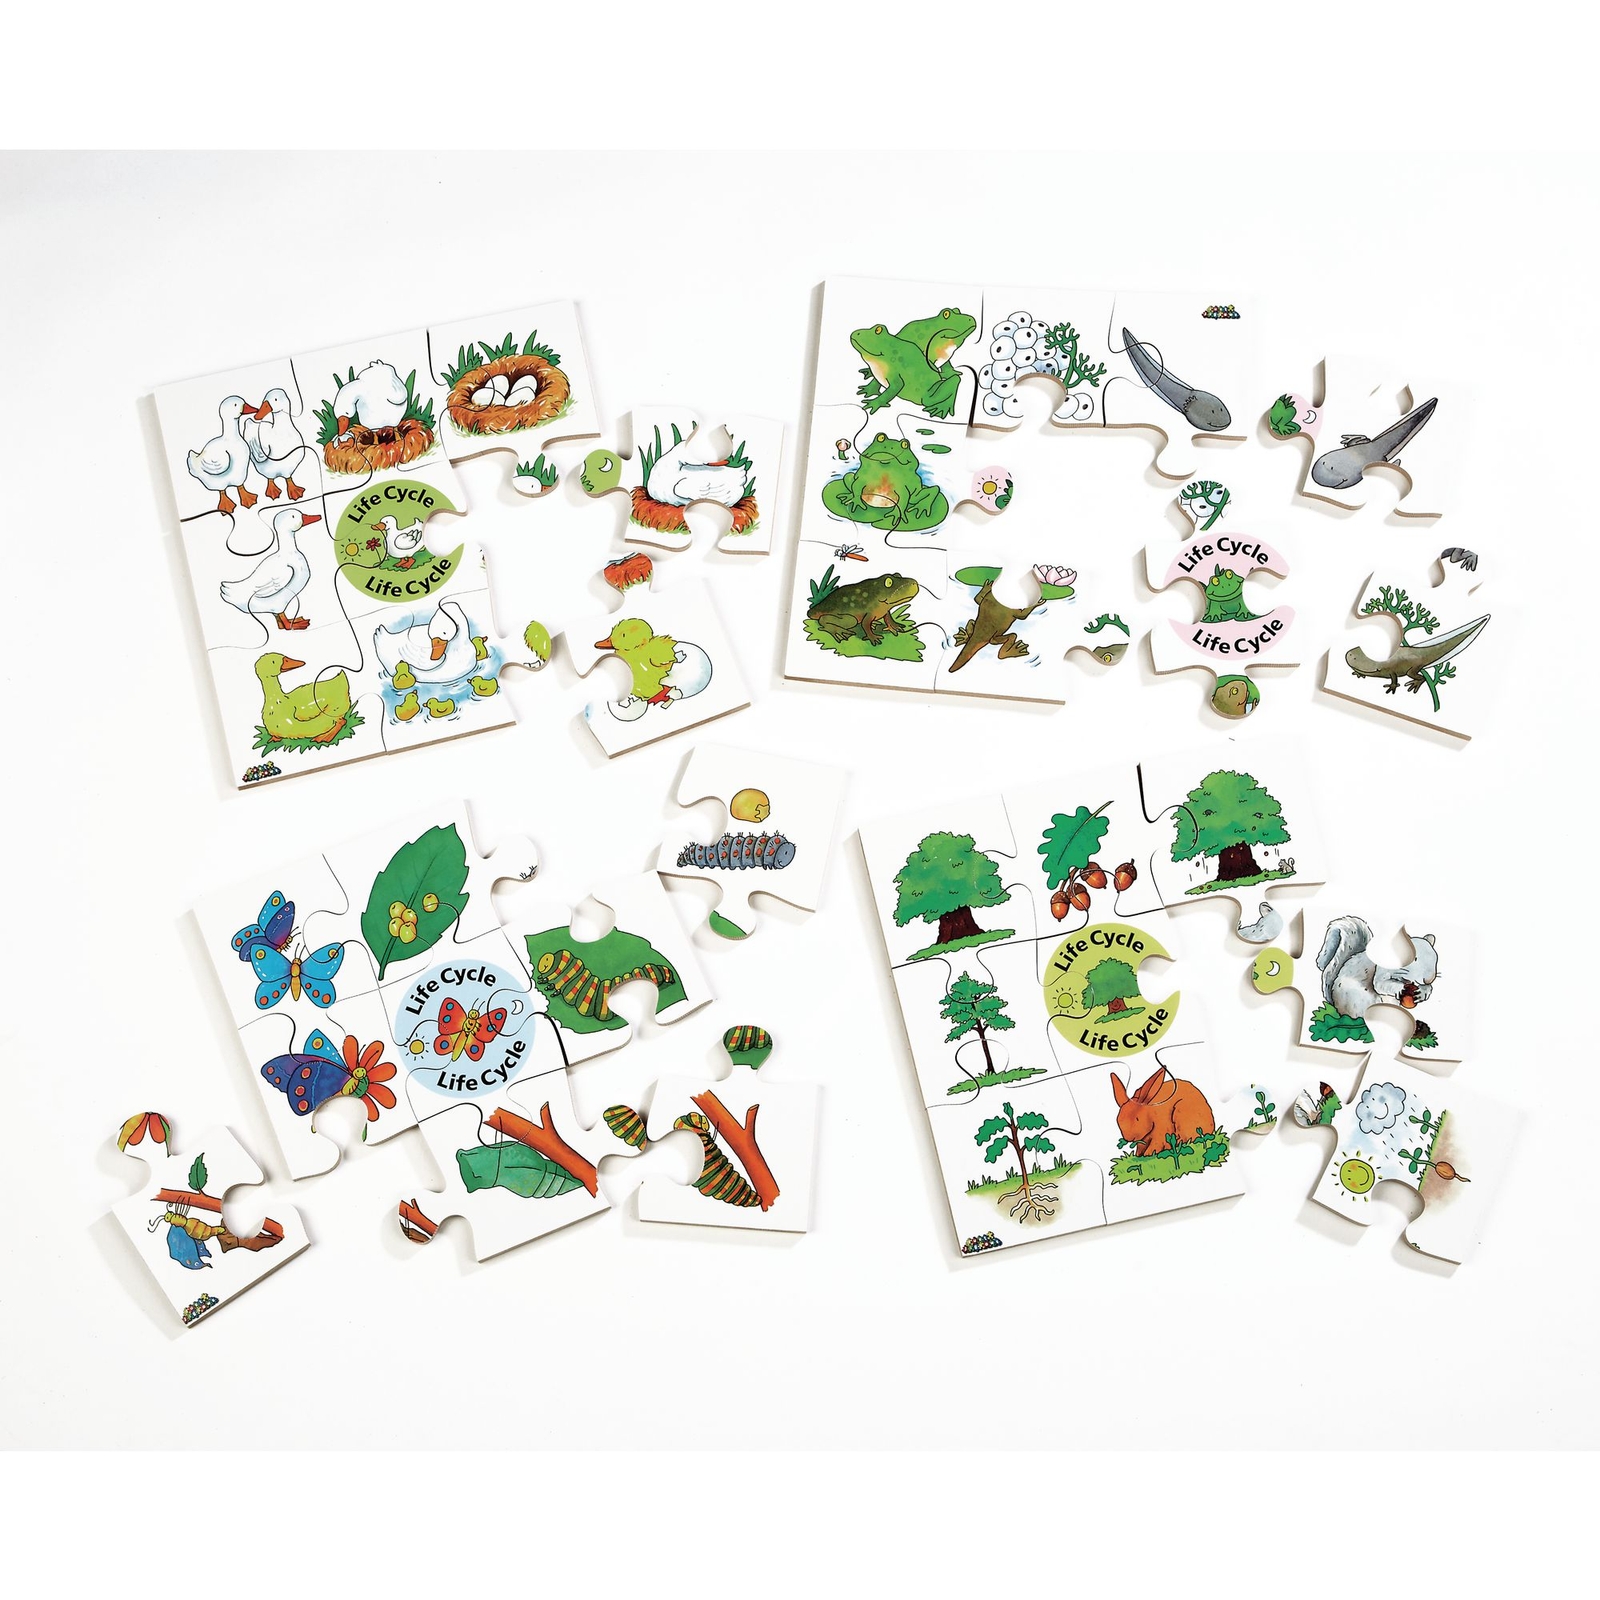 Life Cycle Jigsaw Puzzles